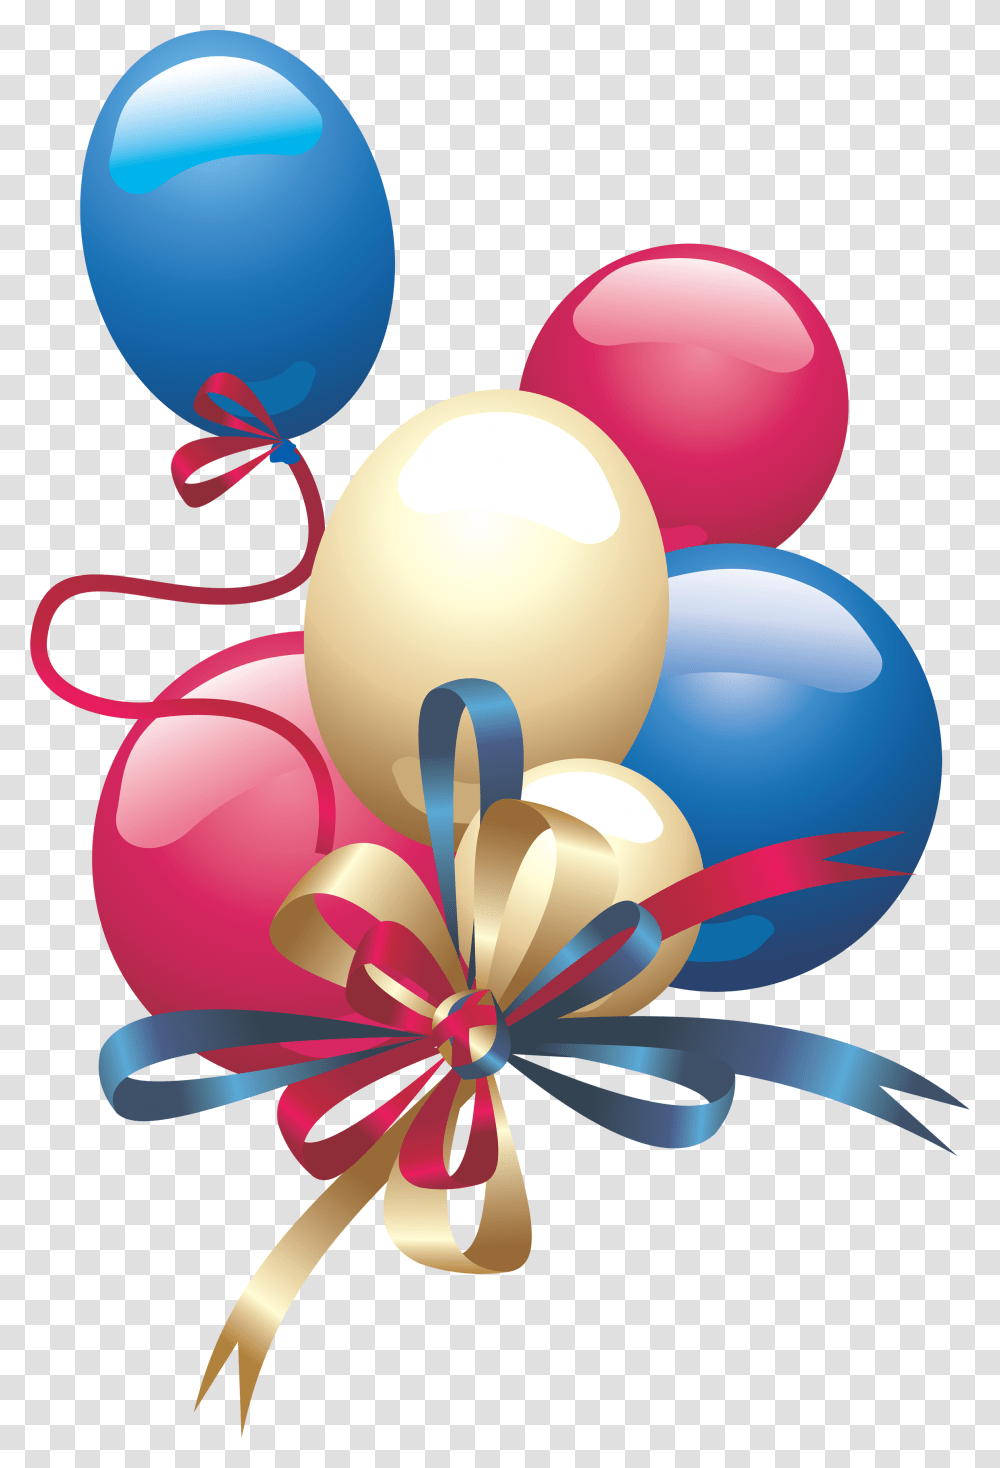 Balloon Images Free Picture Download With Transparency, Gift Transparent Png